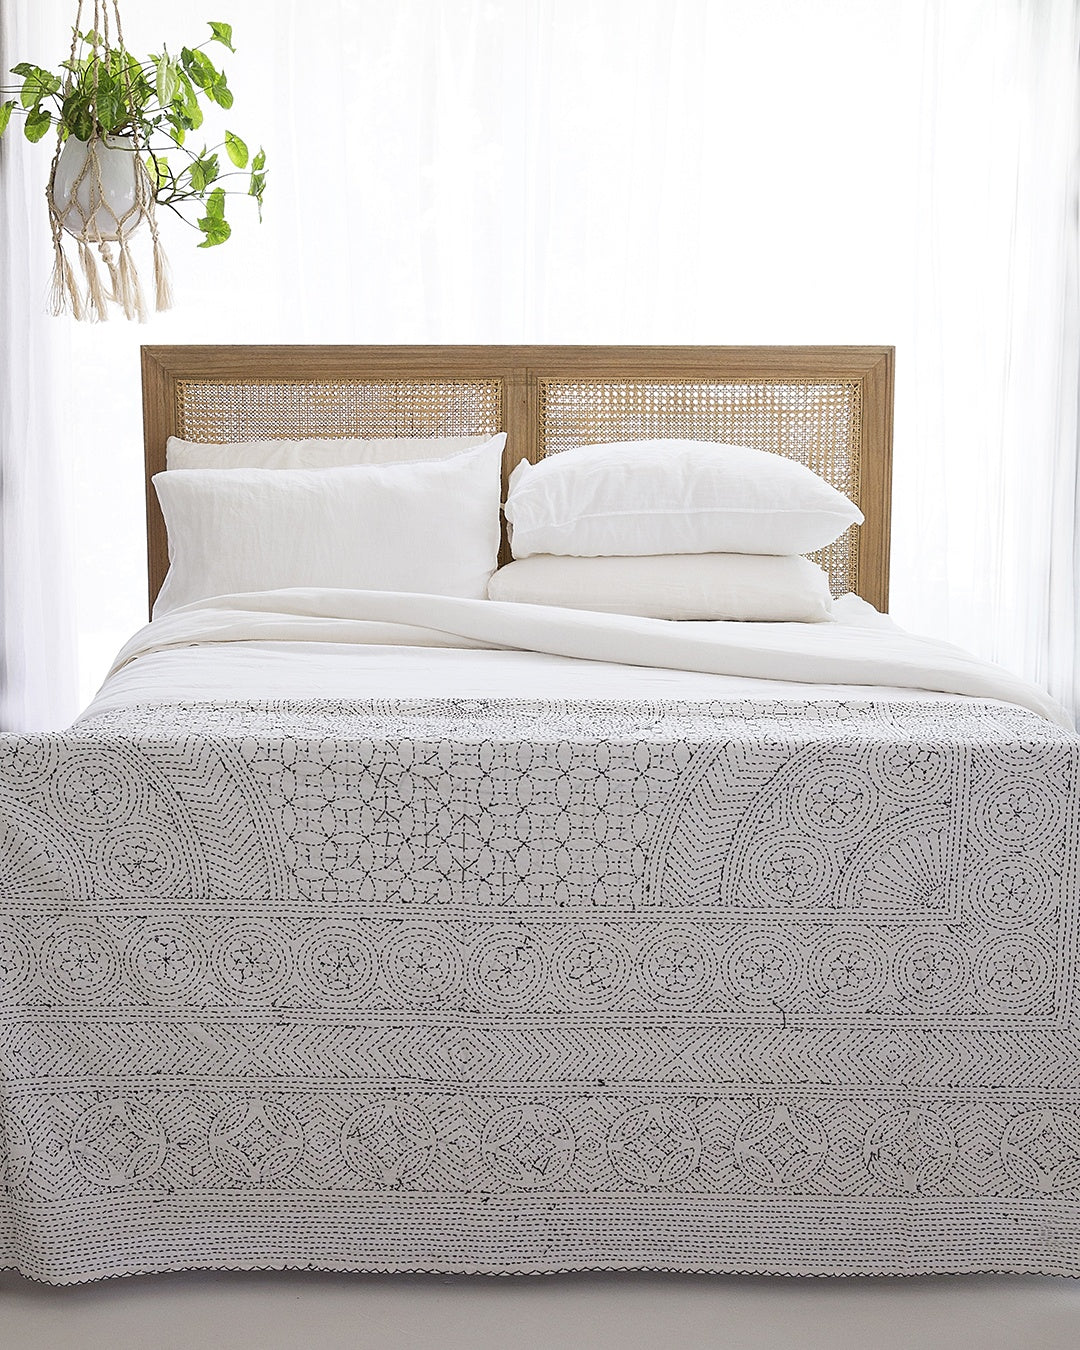 Daydream Cane Bed - Queen Size - Weathered Oak